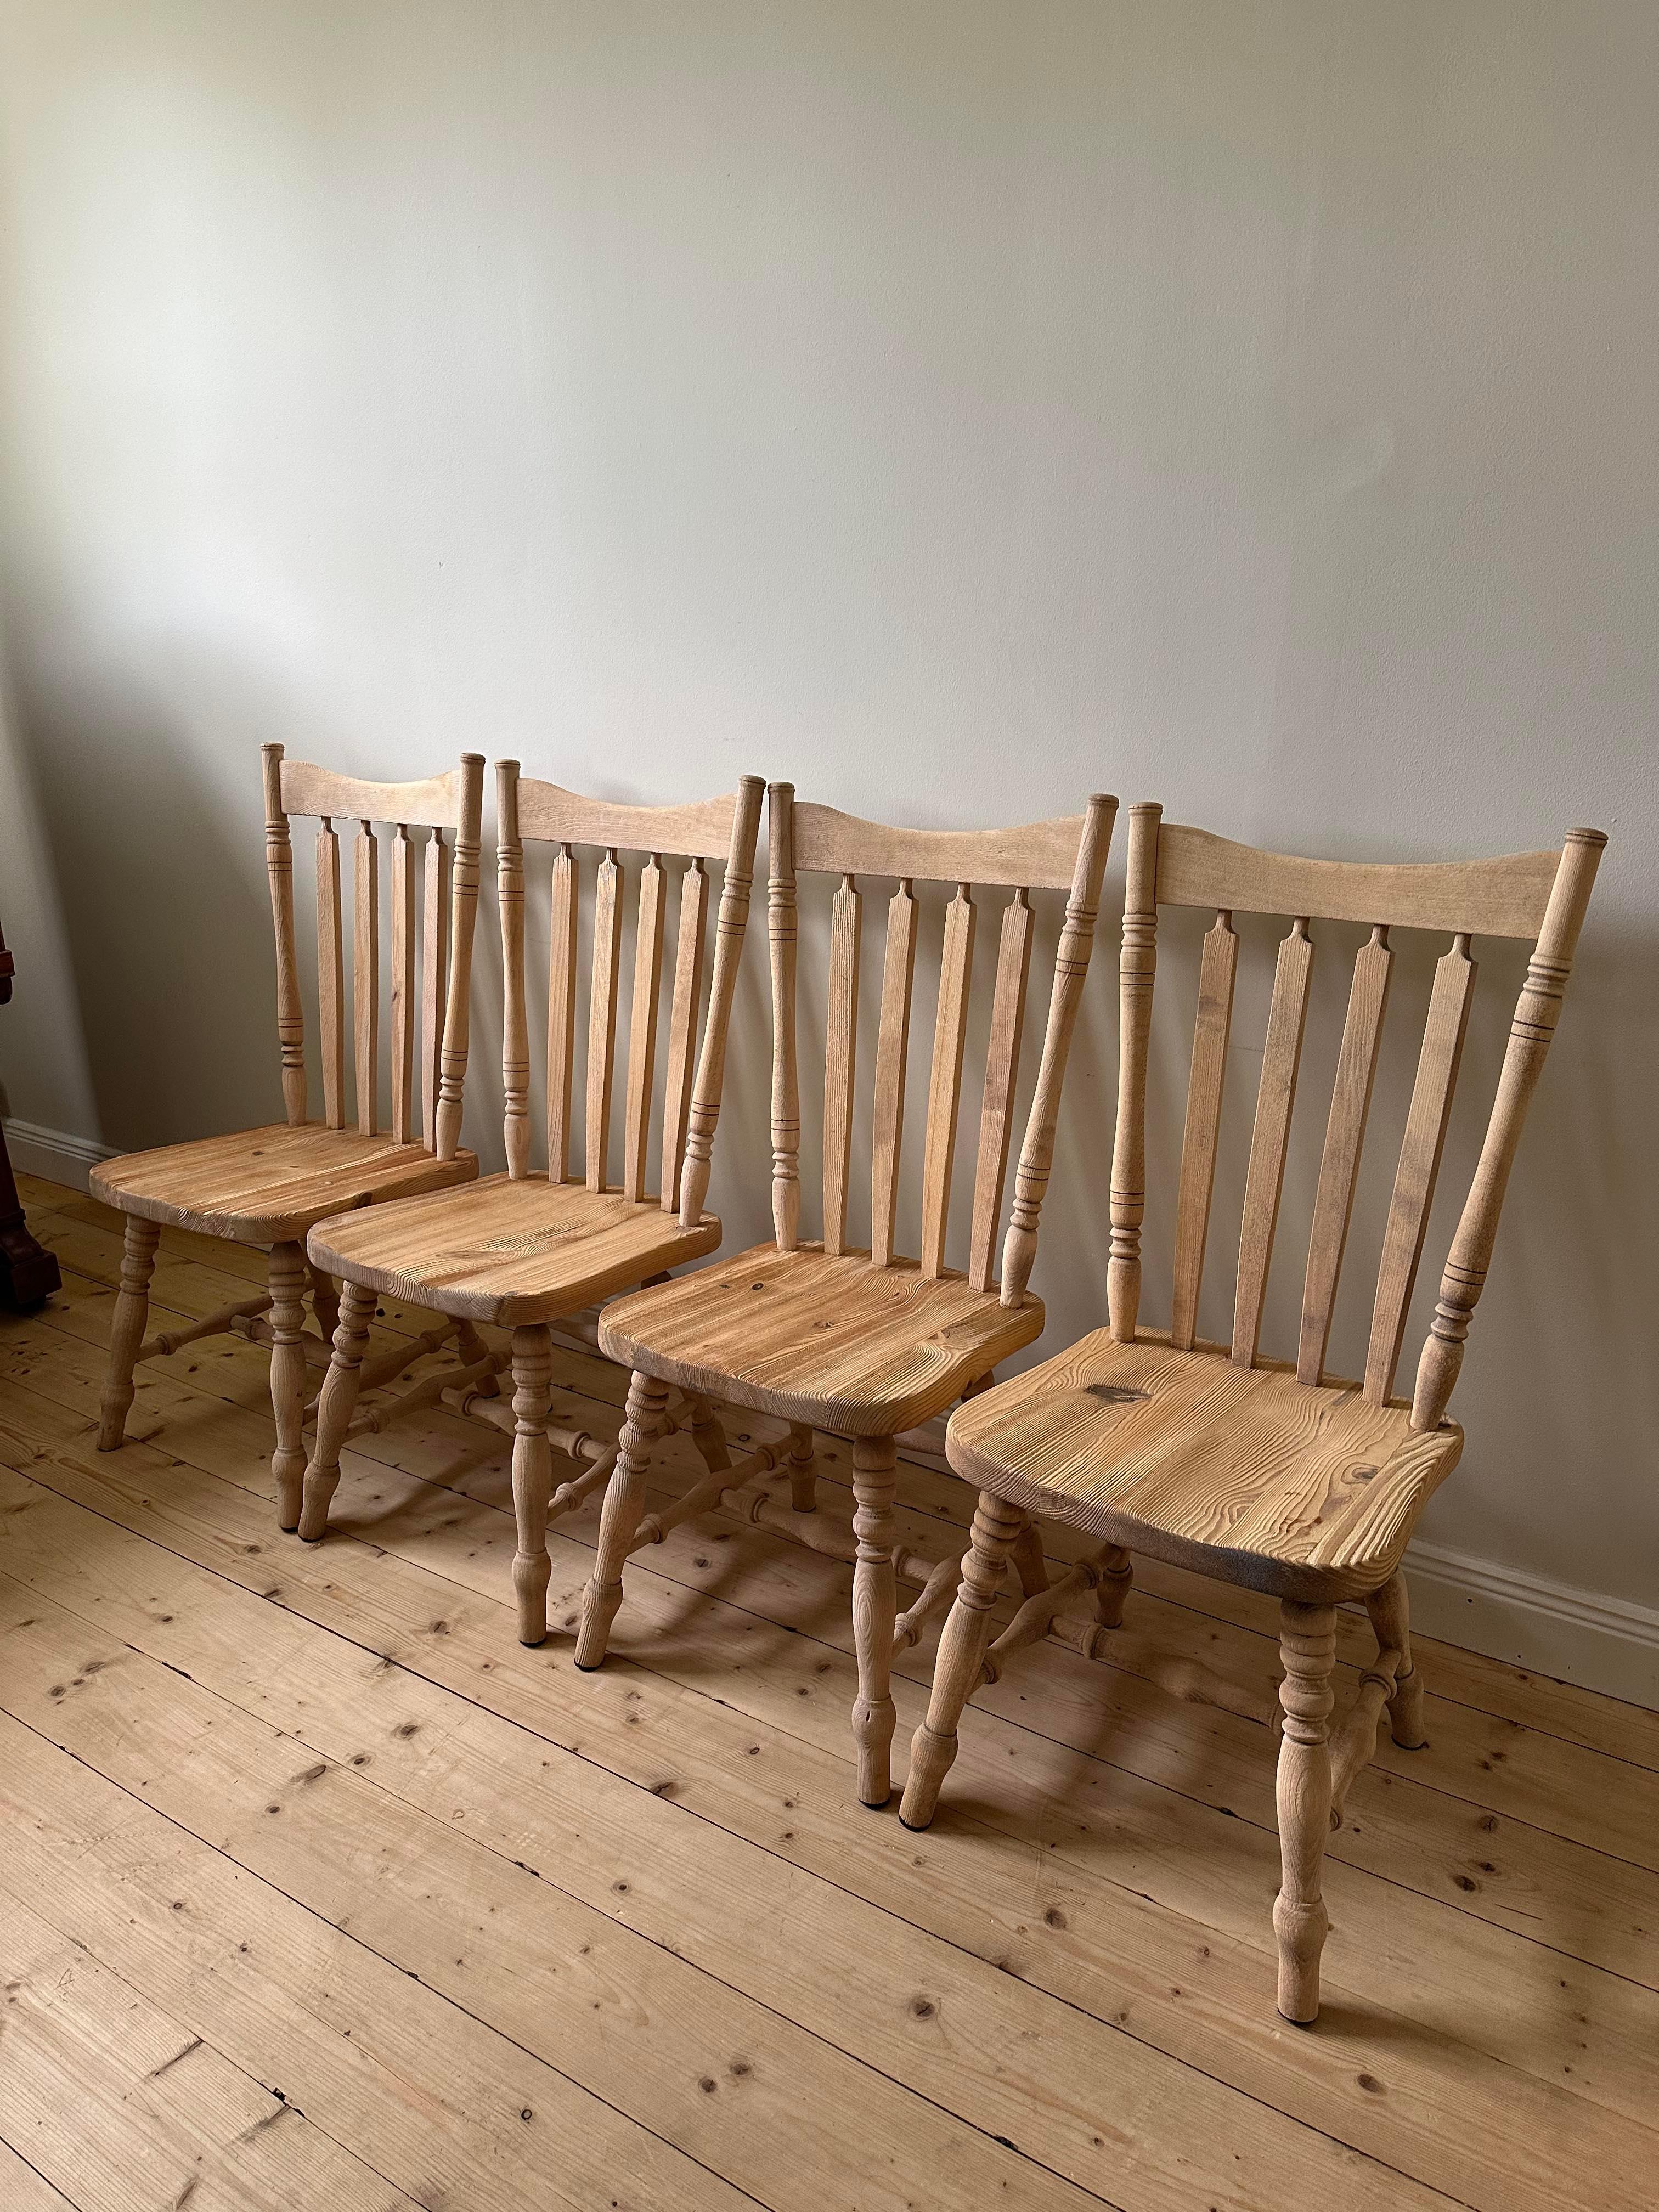 4 beautiful sand blasted dining chairs in solid pine. 
Really good condition. 